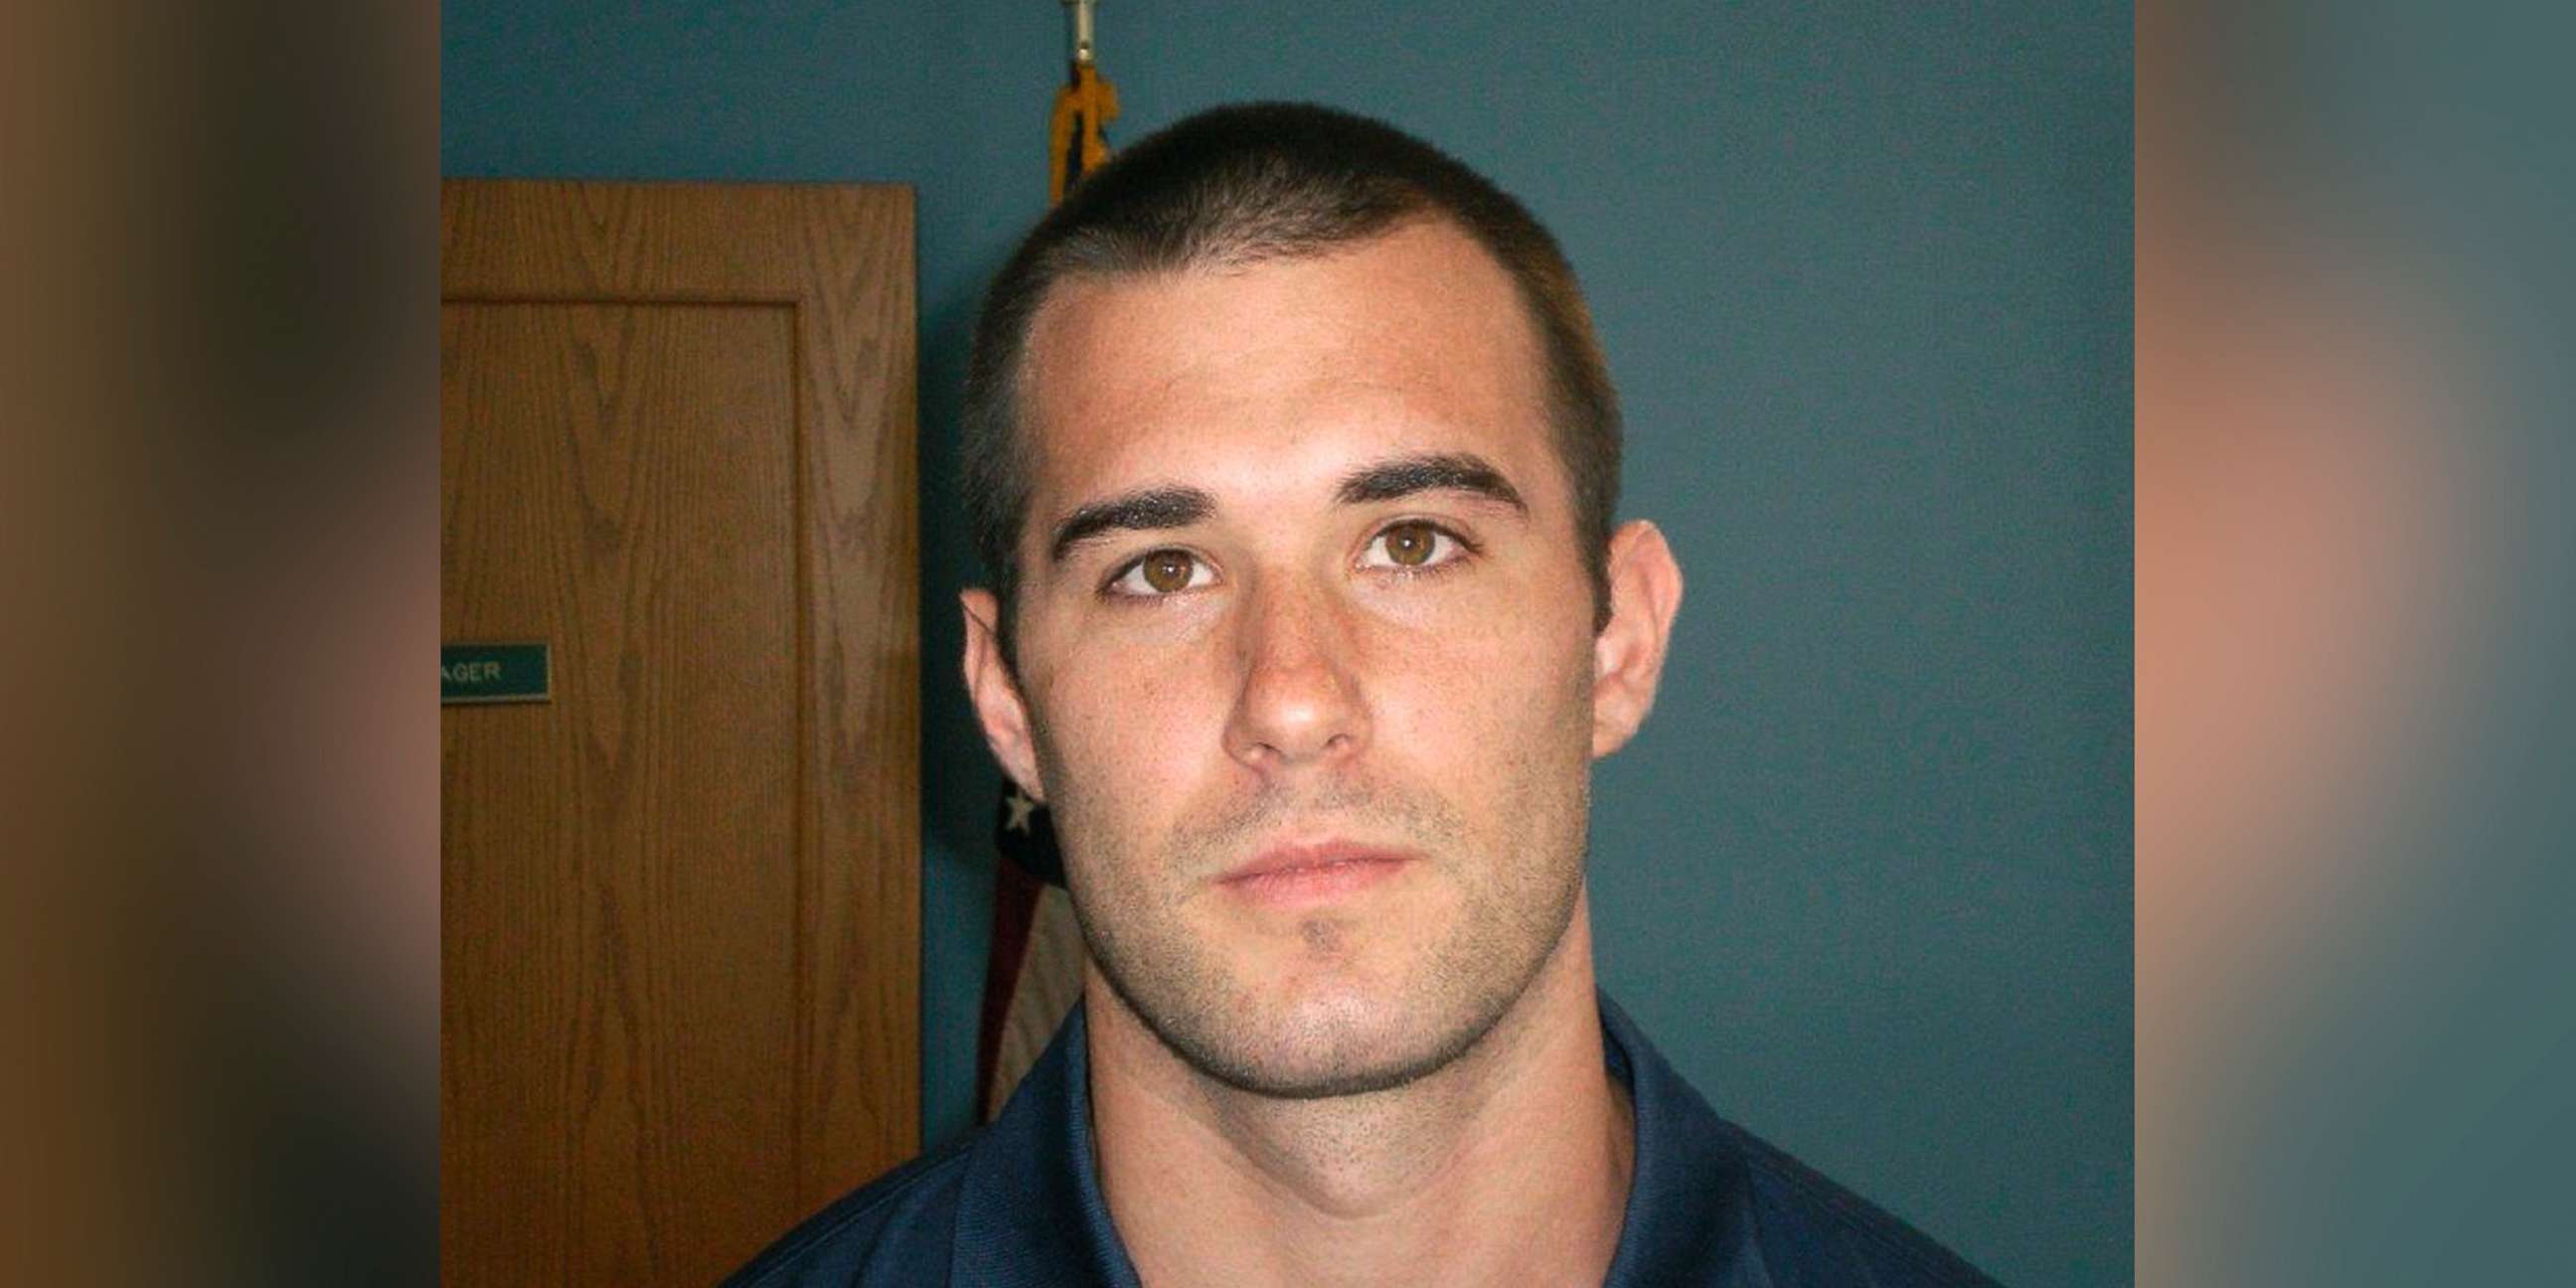 PHOTO: Police officer Zechariah Presley who was charged with voluntary manslaughter and violating his oath of office, after state investigators said he fatally shot a black man who was running away from him on June 21.